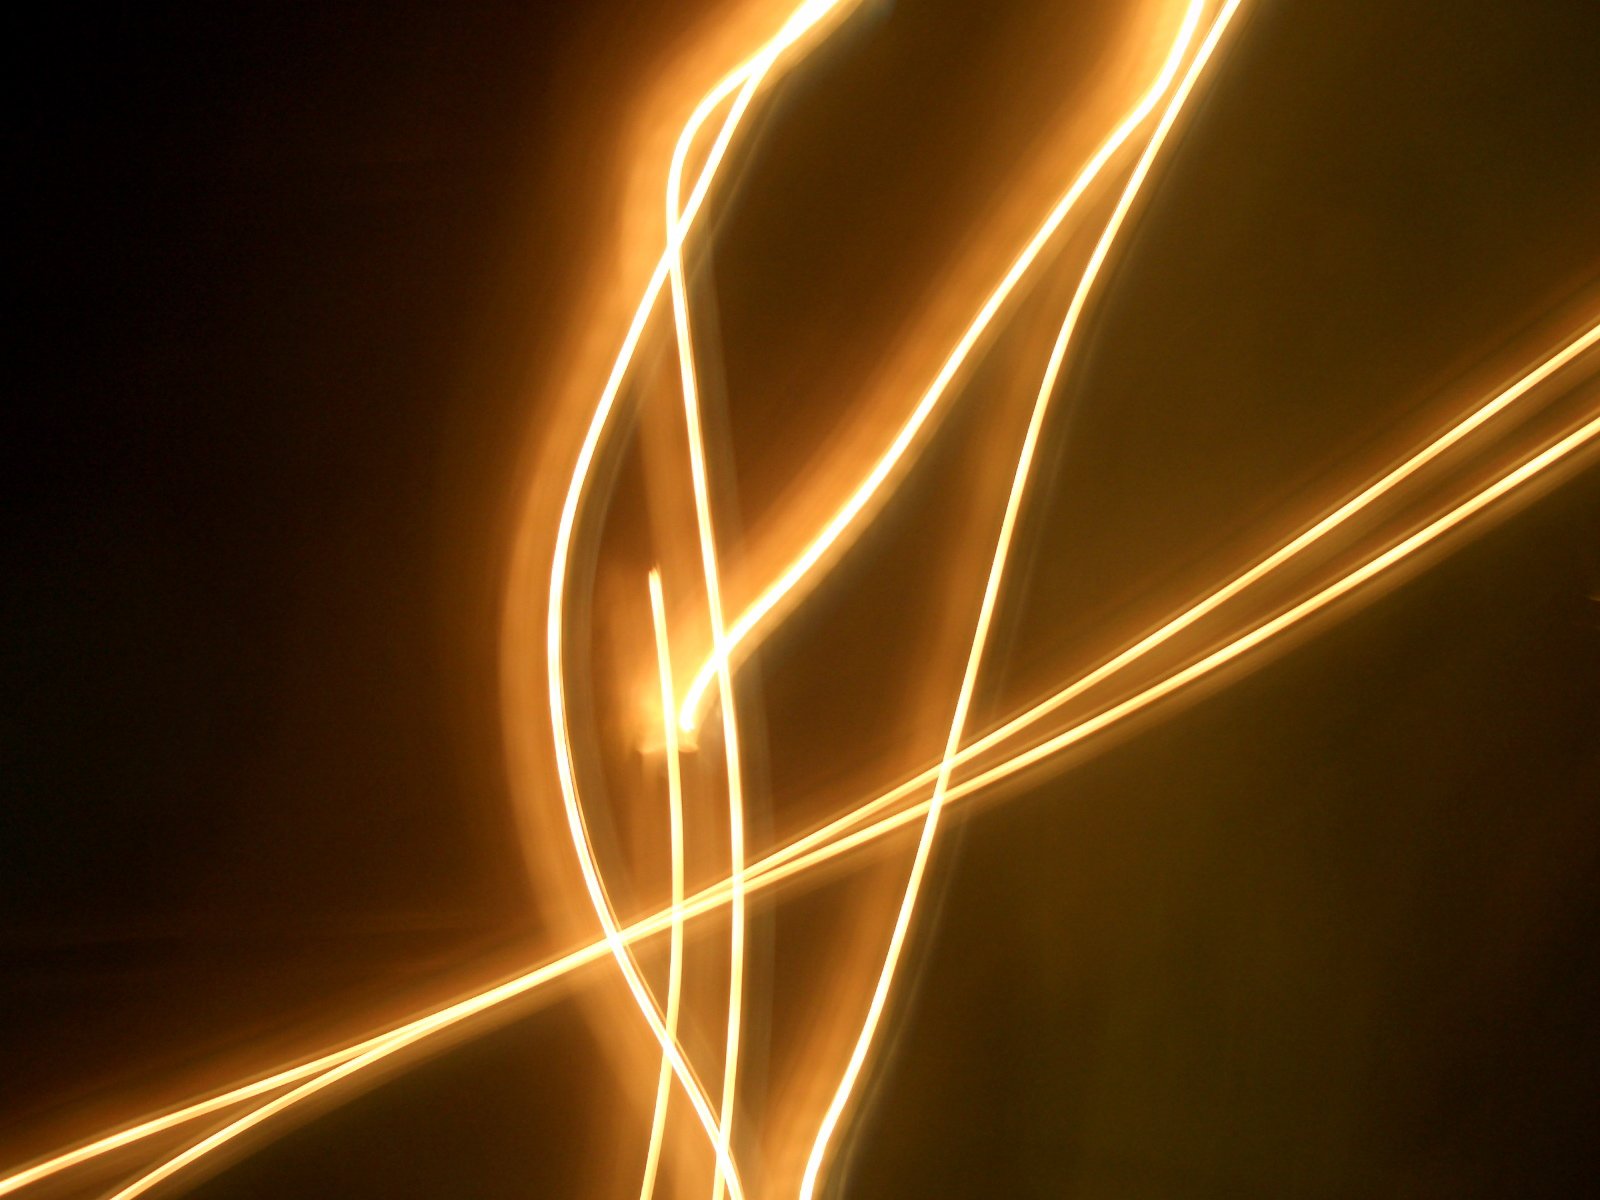 a very long exposure of some lights with a clock